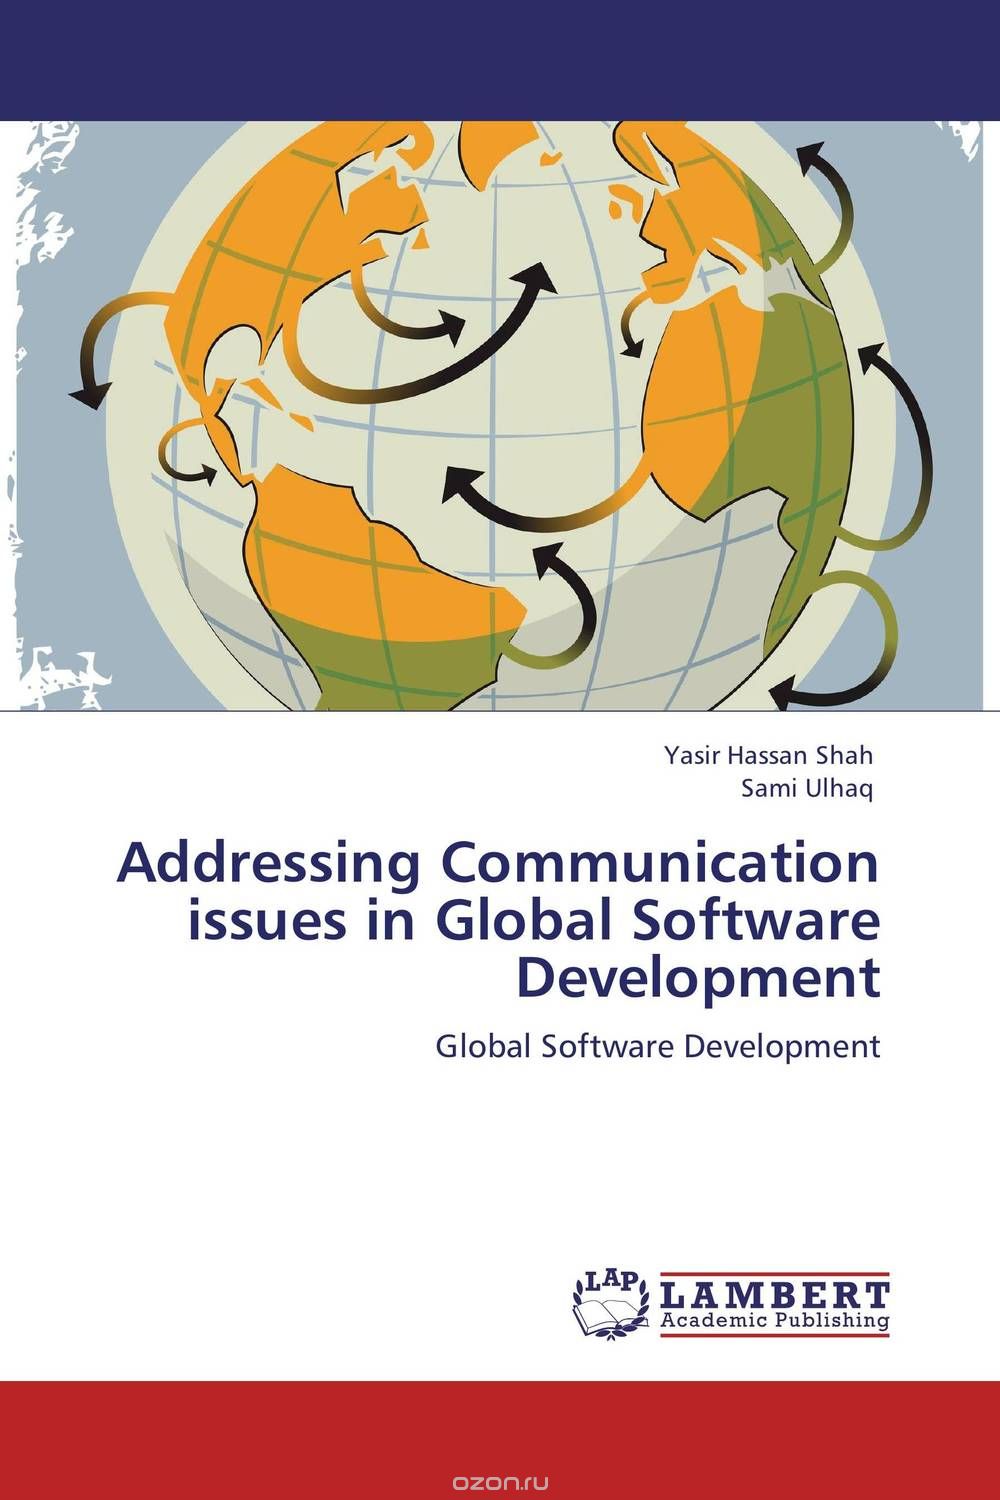 Addressing Communication issues in Global Software Development